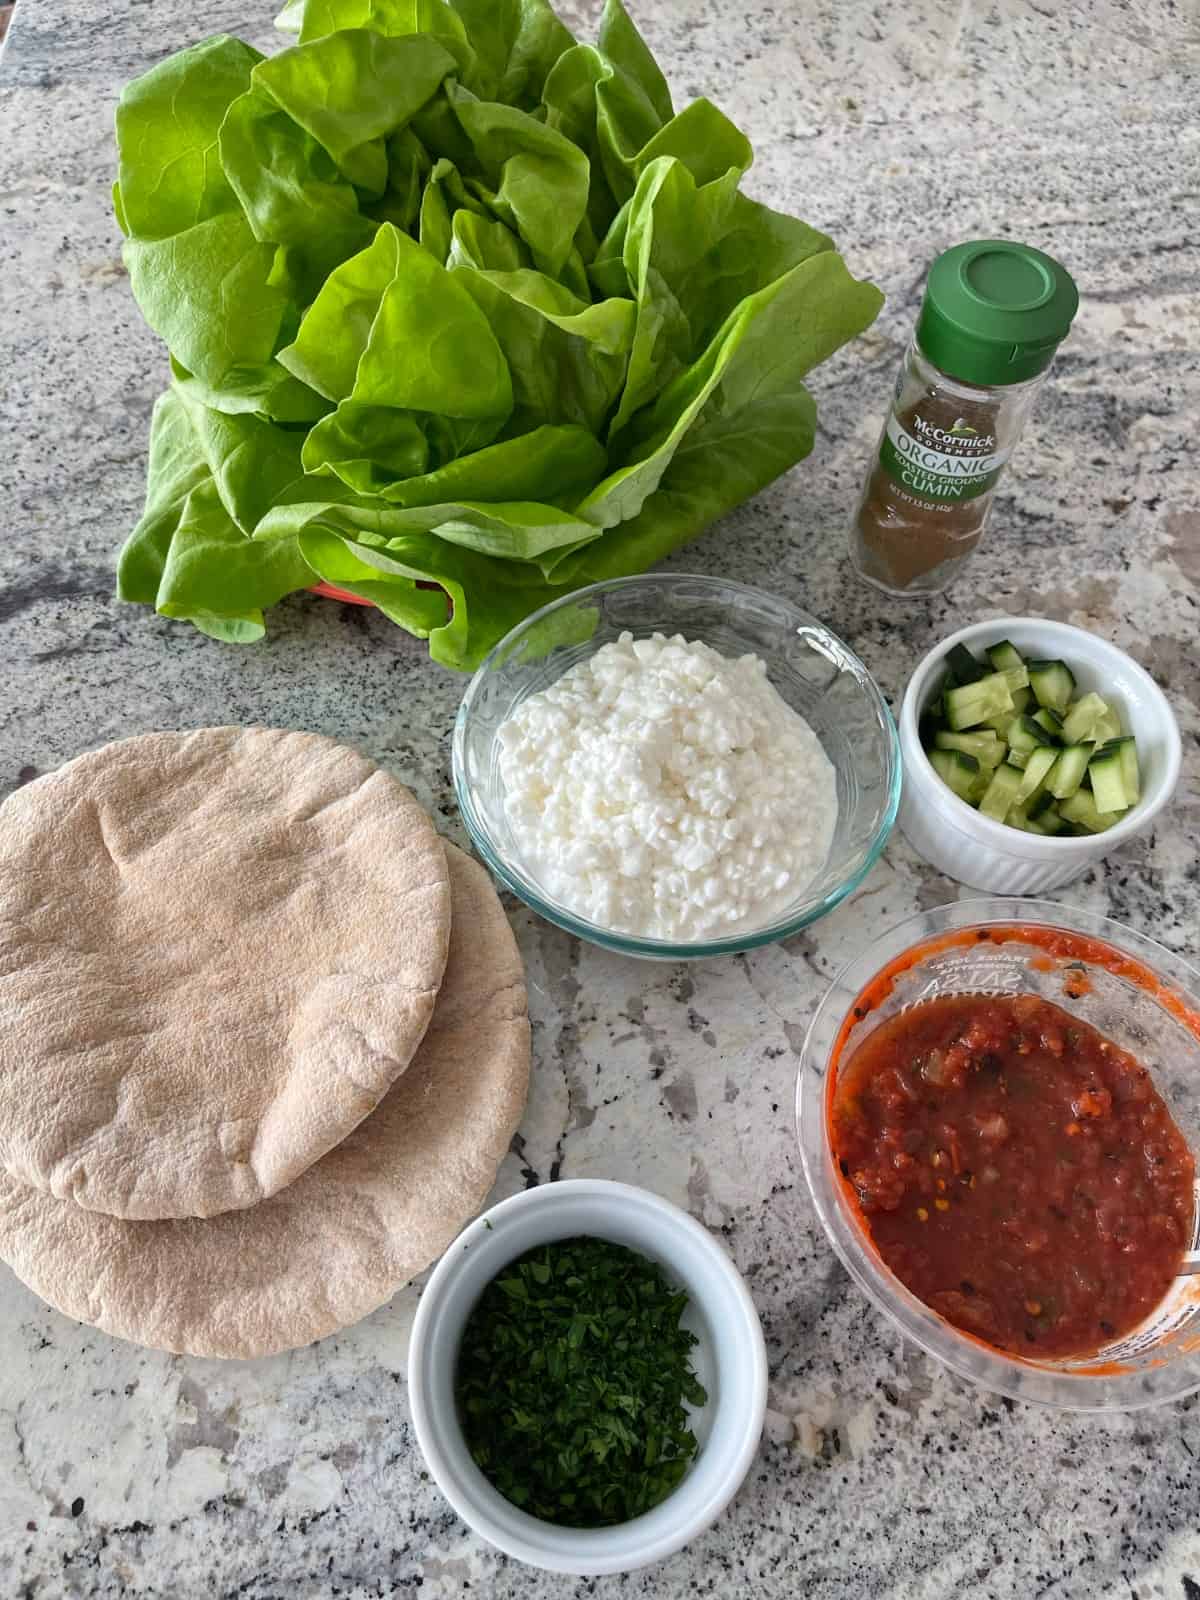 Bibb lettuce, cottage cheese, salsa, chopped cilantro leaves, two whole wheat pita breads, cucumber and ground cumin on a granite counter top.